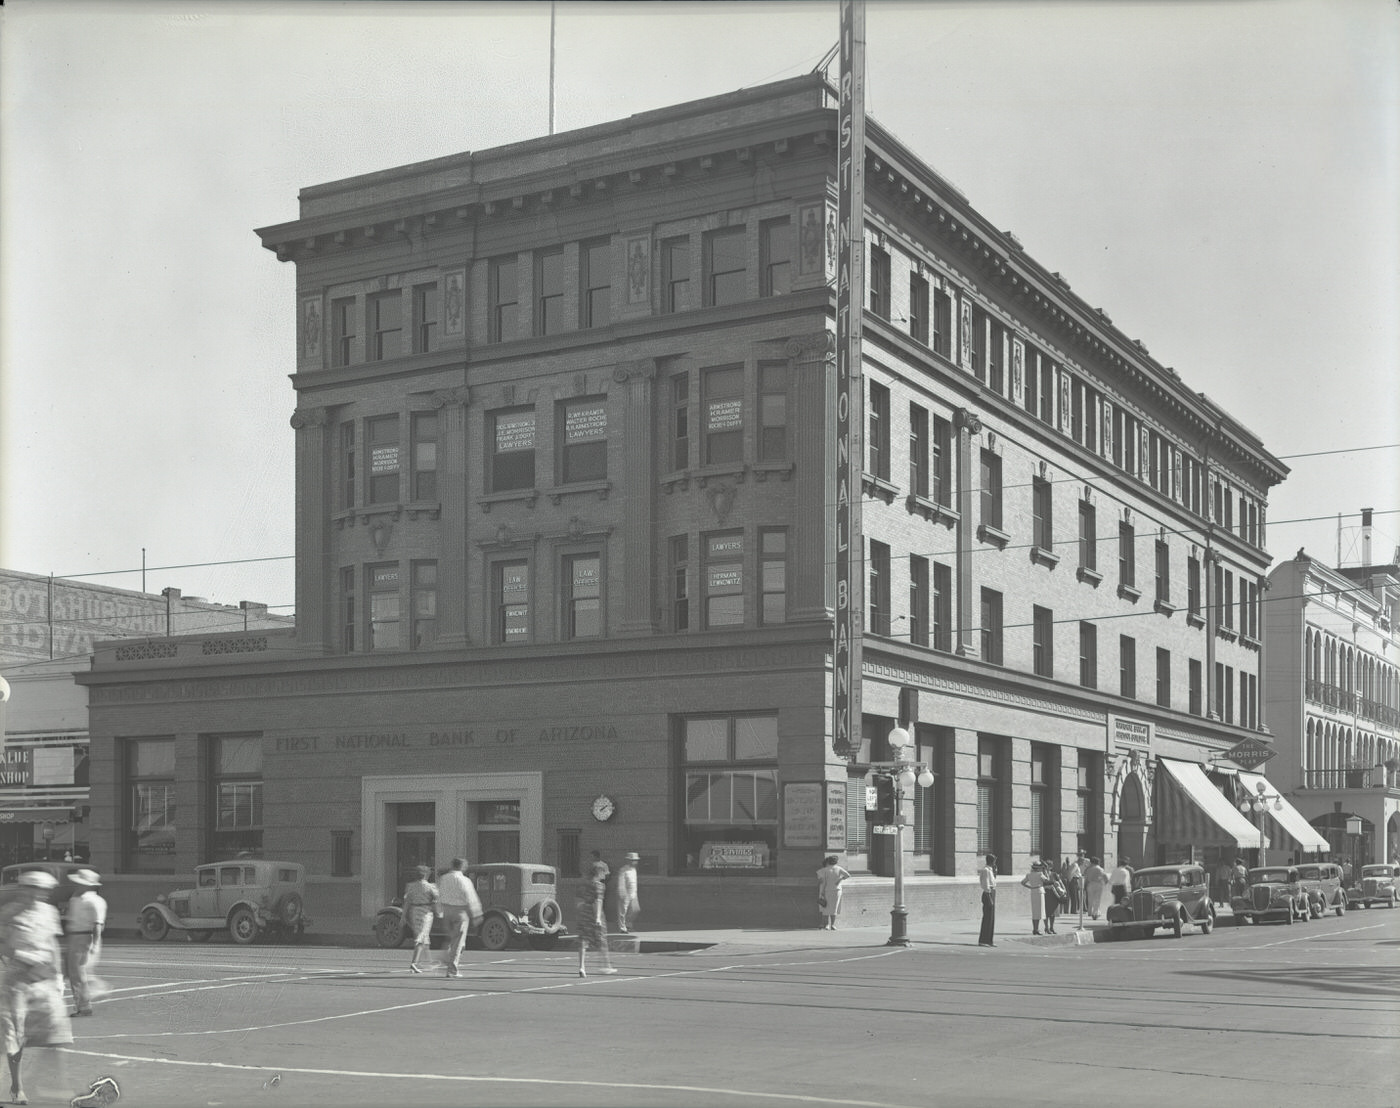 First National Bank Building Exterior. This bank was located at Central Ave. and Washington St. in Phoenix, 1930s